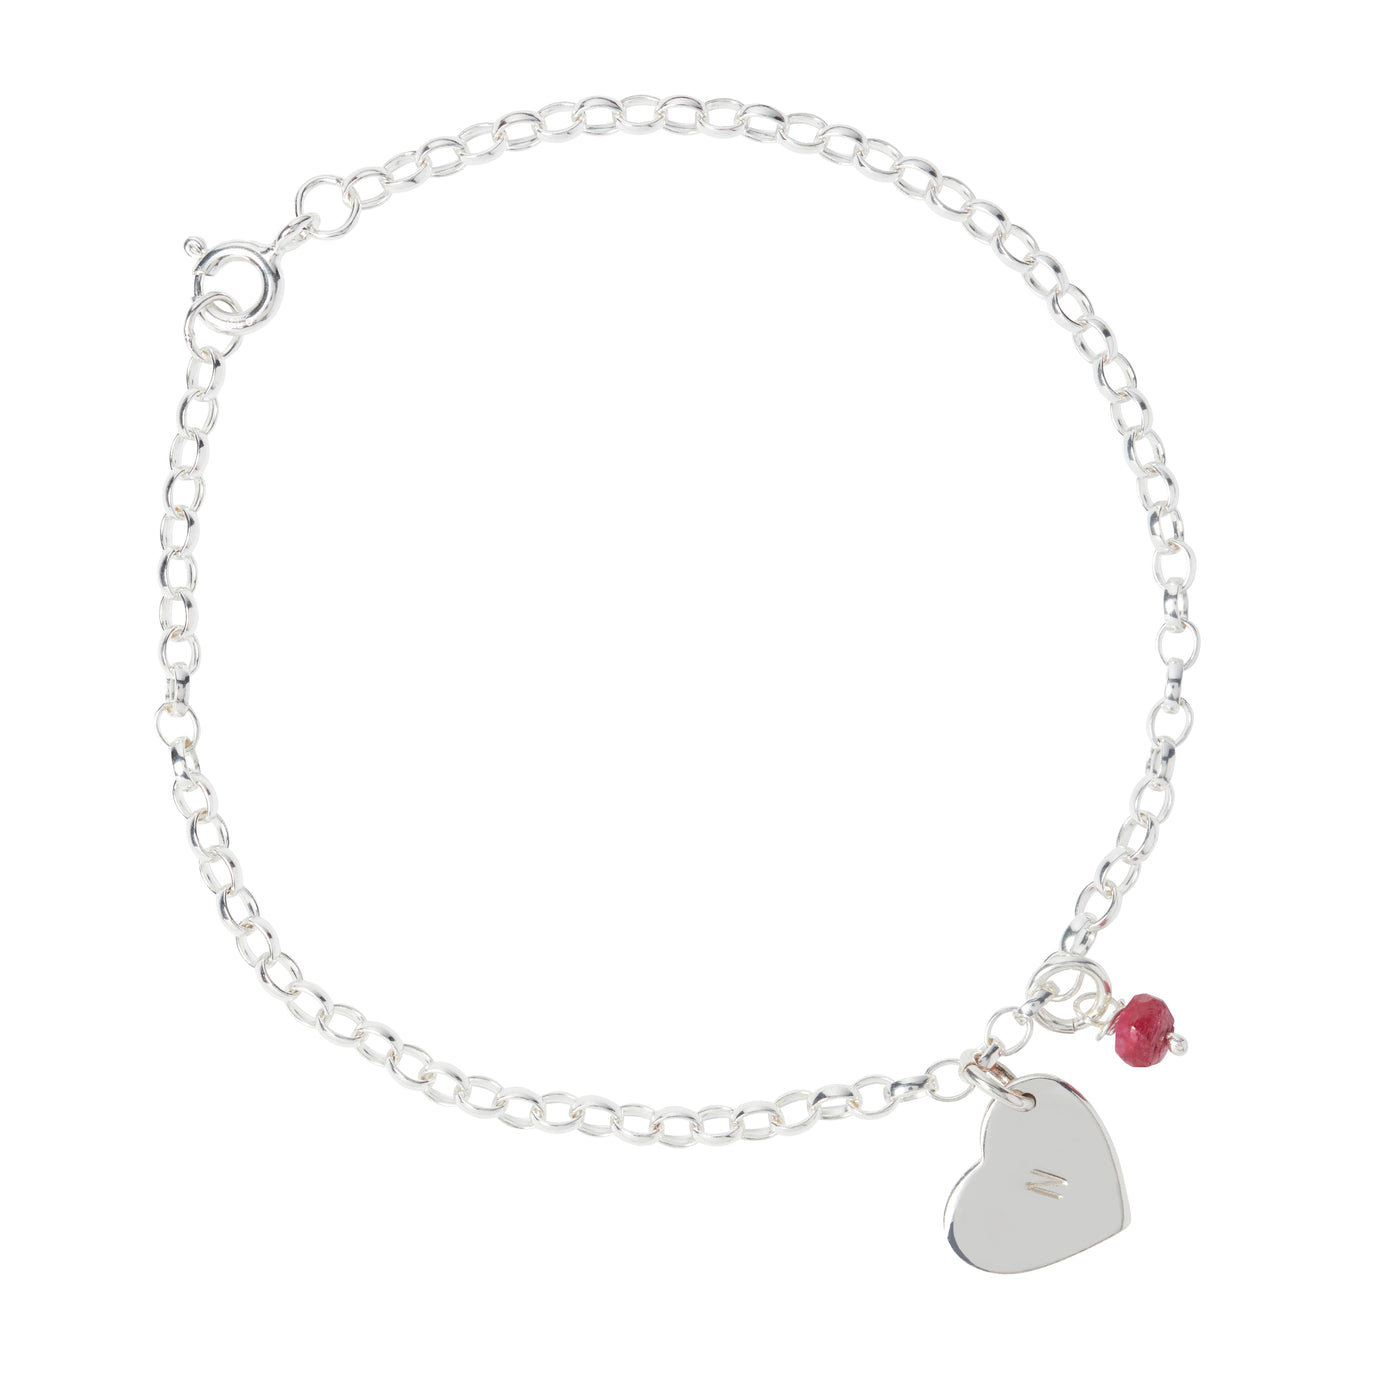 Personalised Silver Heart and Birthstone Charm Bracelet